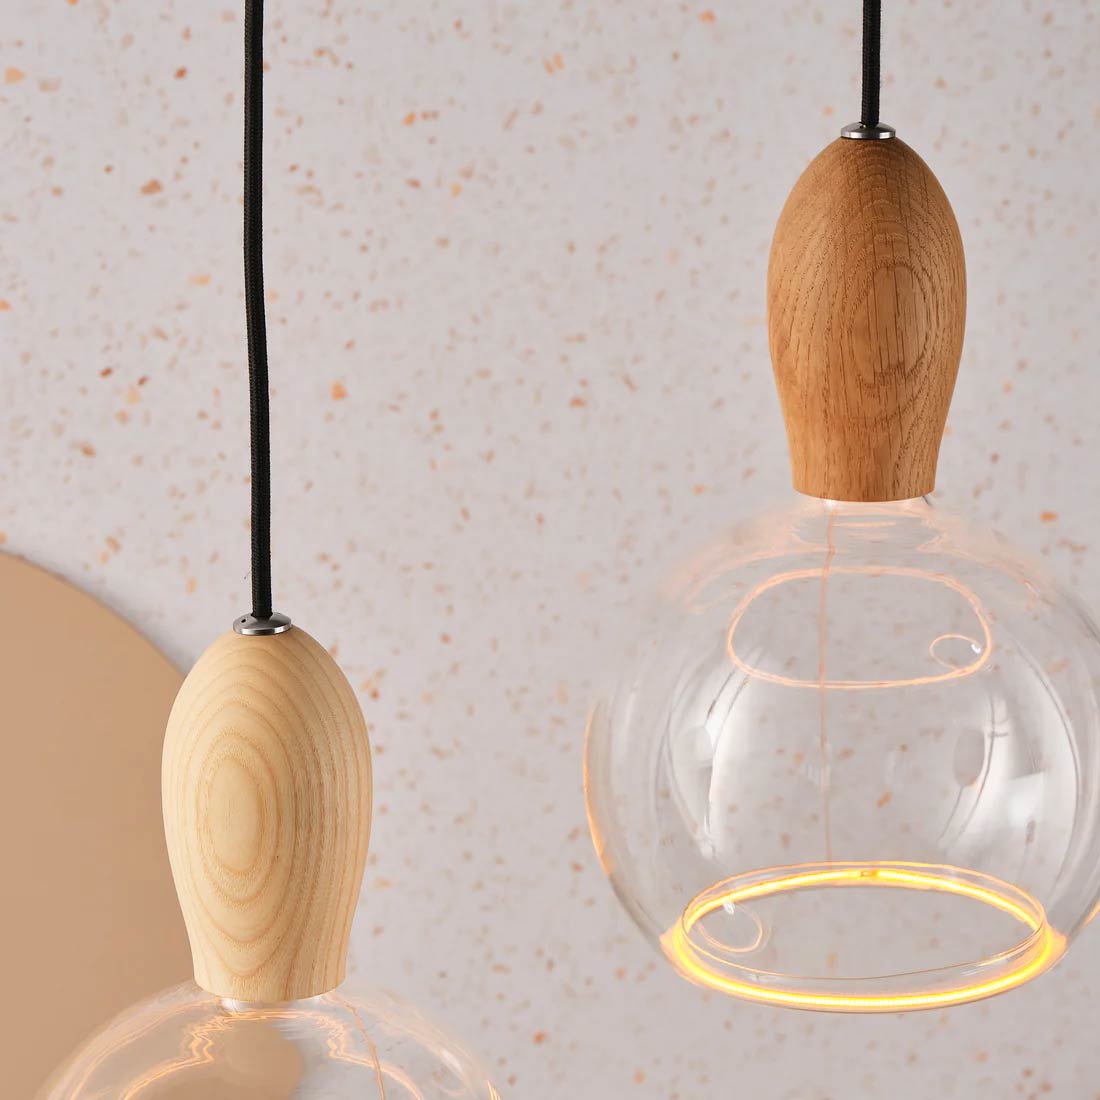 Comparison of the Oak and Ash wood types available on the Woody pendant lights